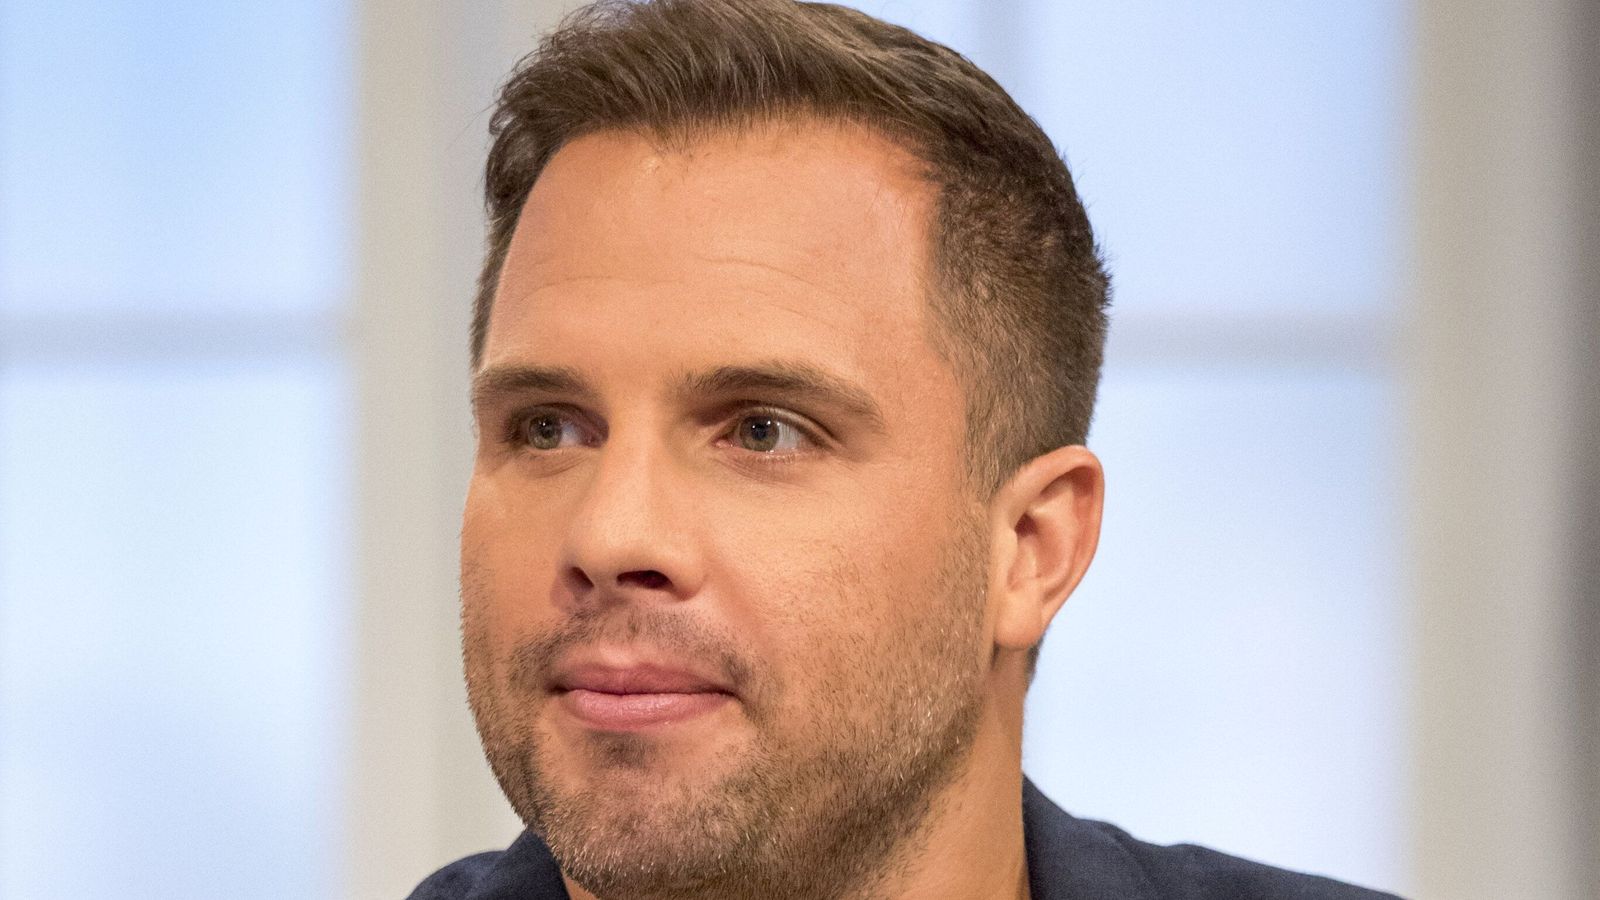 Dan Wootton: GB News presenter hits out at 'untrue' allegations and claims he is the victim of a 'smear campaign'